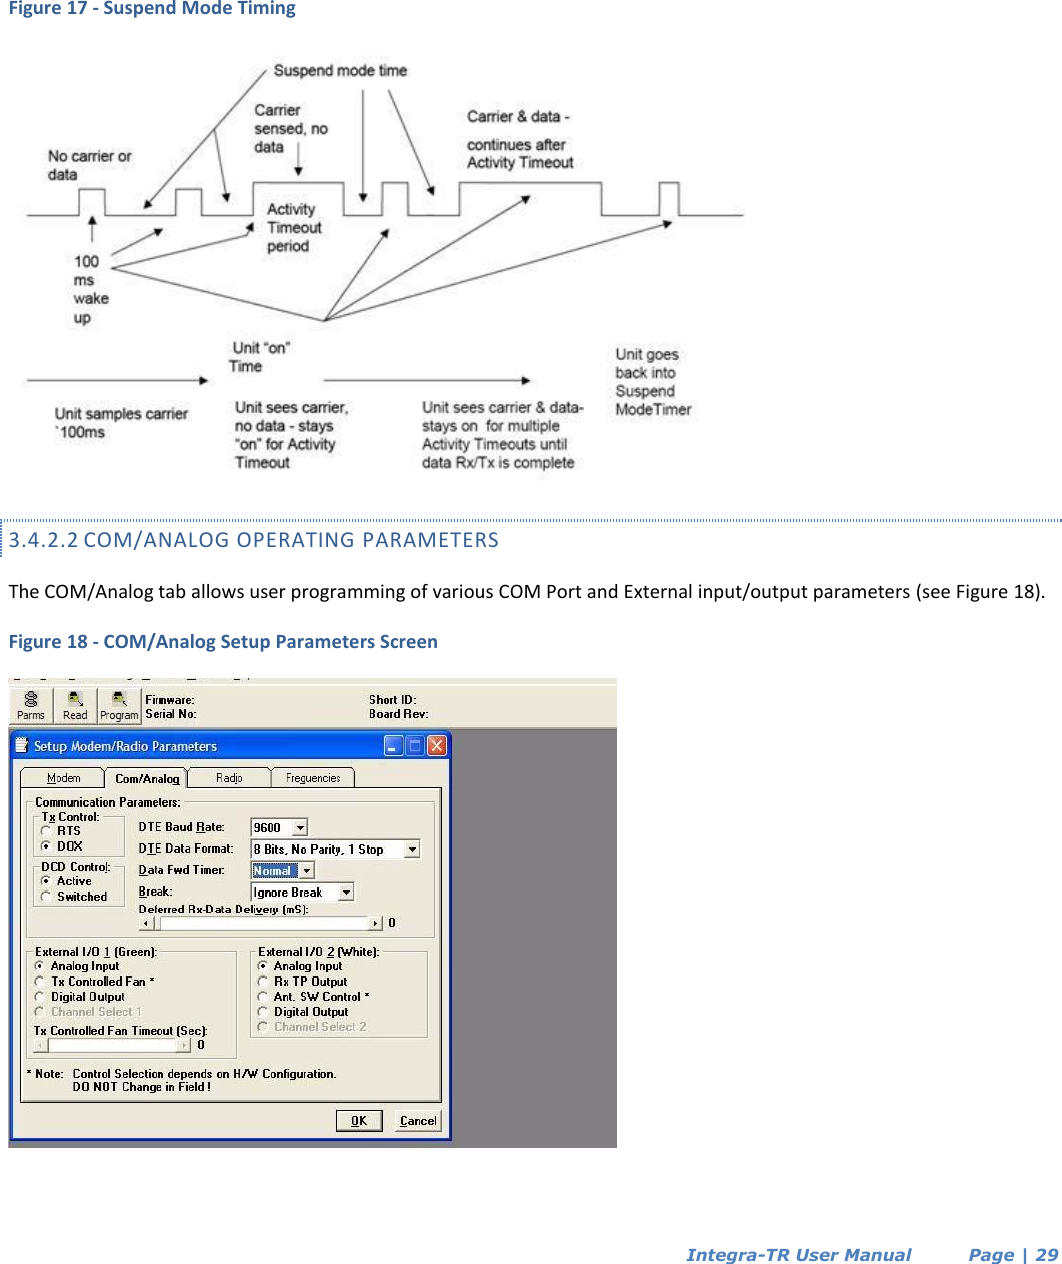  Integra-TR User Manual          Page | 29     Figure 17 - Suspend Mode Timing  3.4.2.2 COM/ANALOG OPERATING PARAMETERS The COM/Analog tab allows user programming of various COM Port and External input/output parameters (see Figure 18). Figure 18 - COM/Analog Setup Parameters Screen  